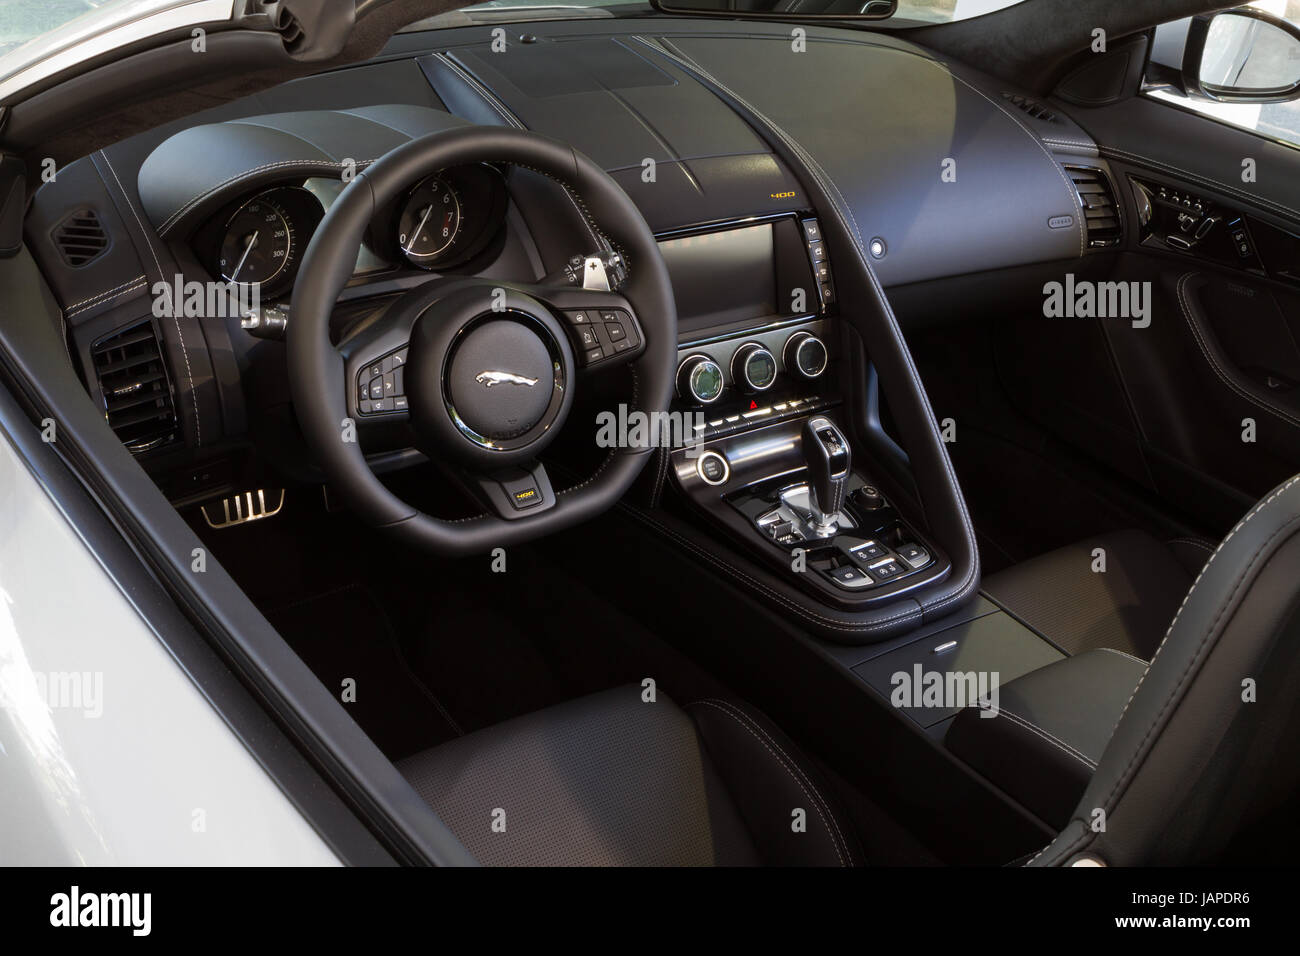 Turin Italy 7th June 2017 Interior View And Dashboard Of